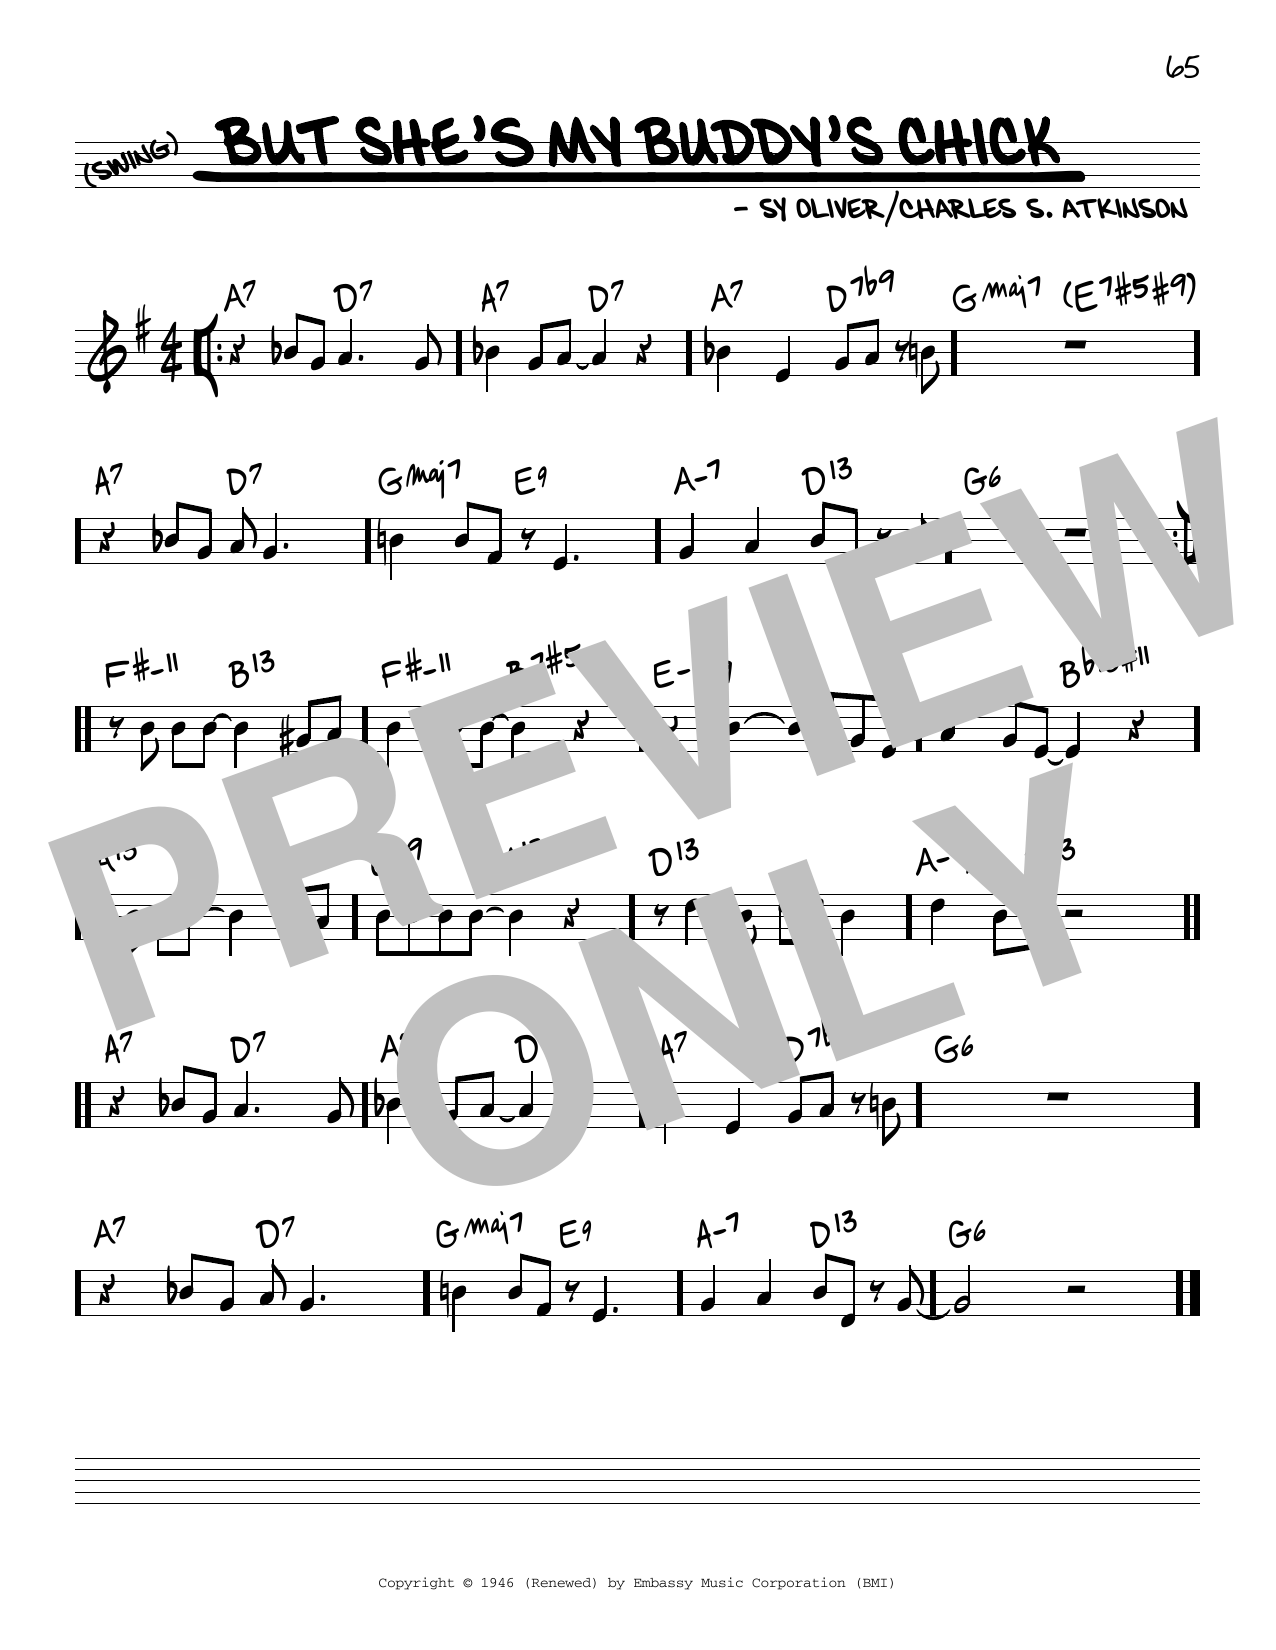 Download Nat King Cole But She's My Buddy's Chick Sheet Music